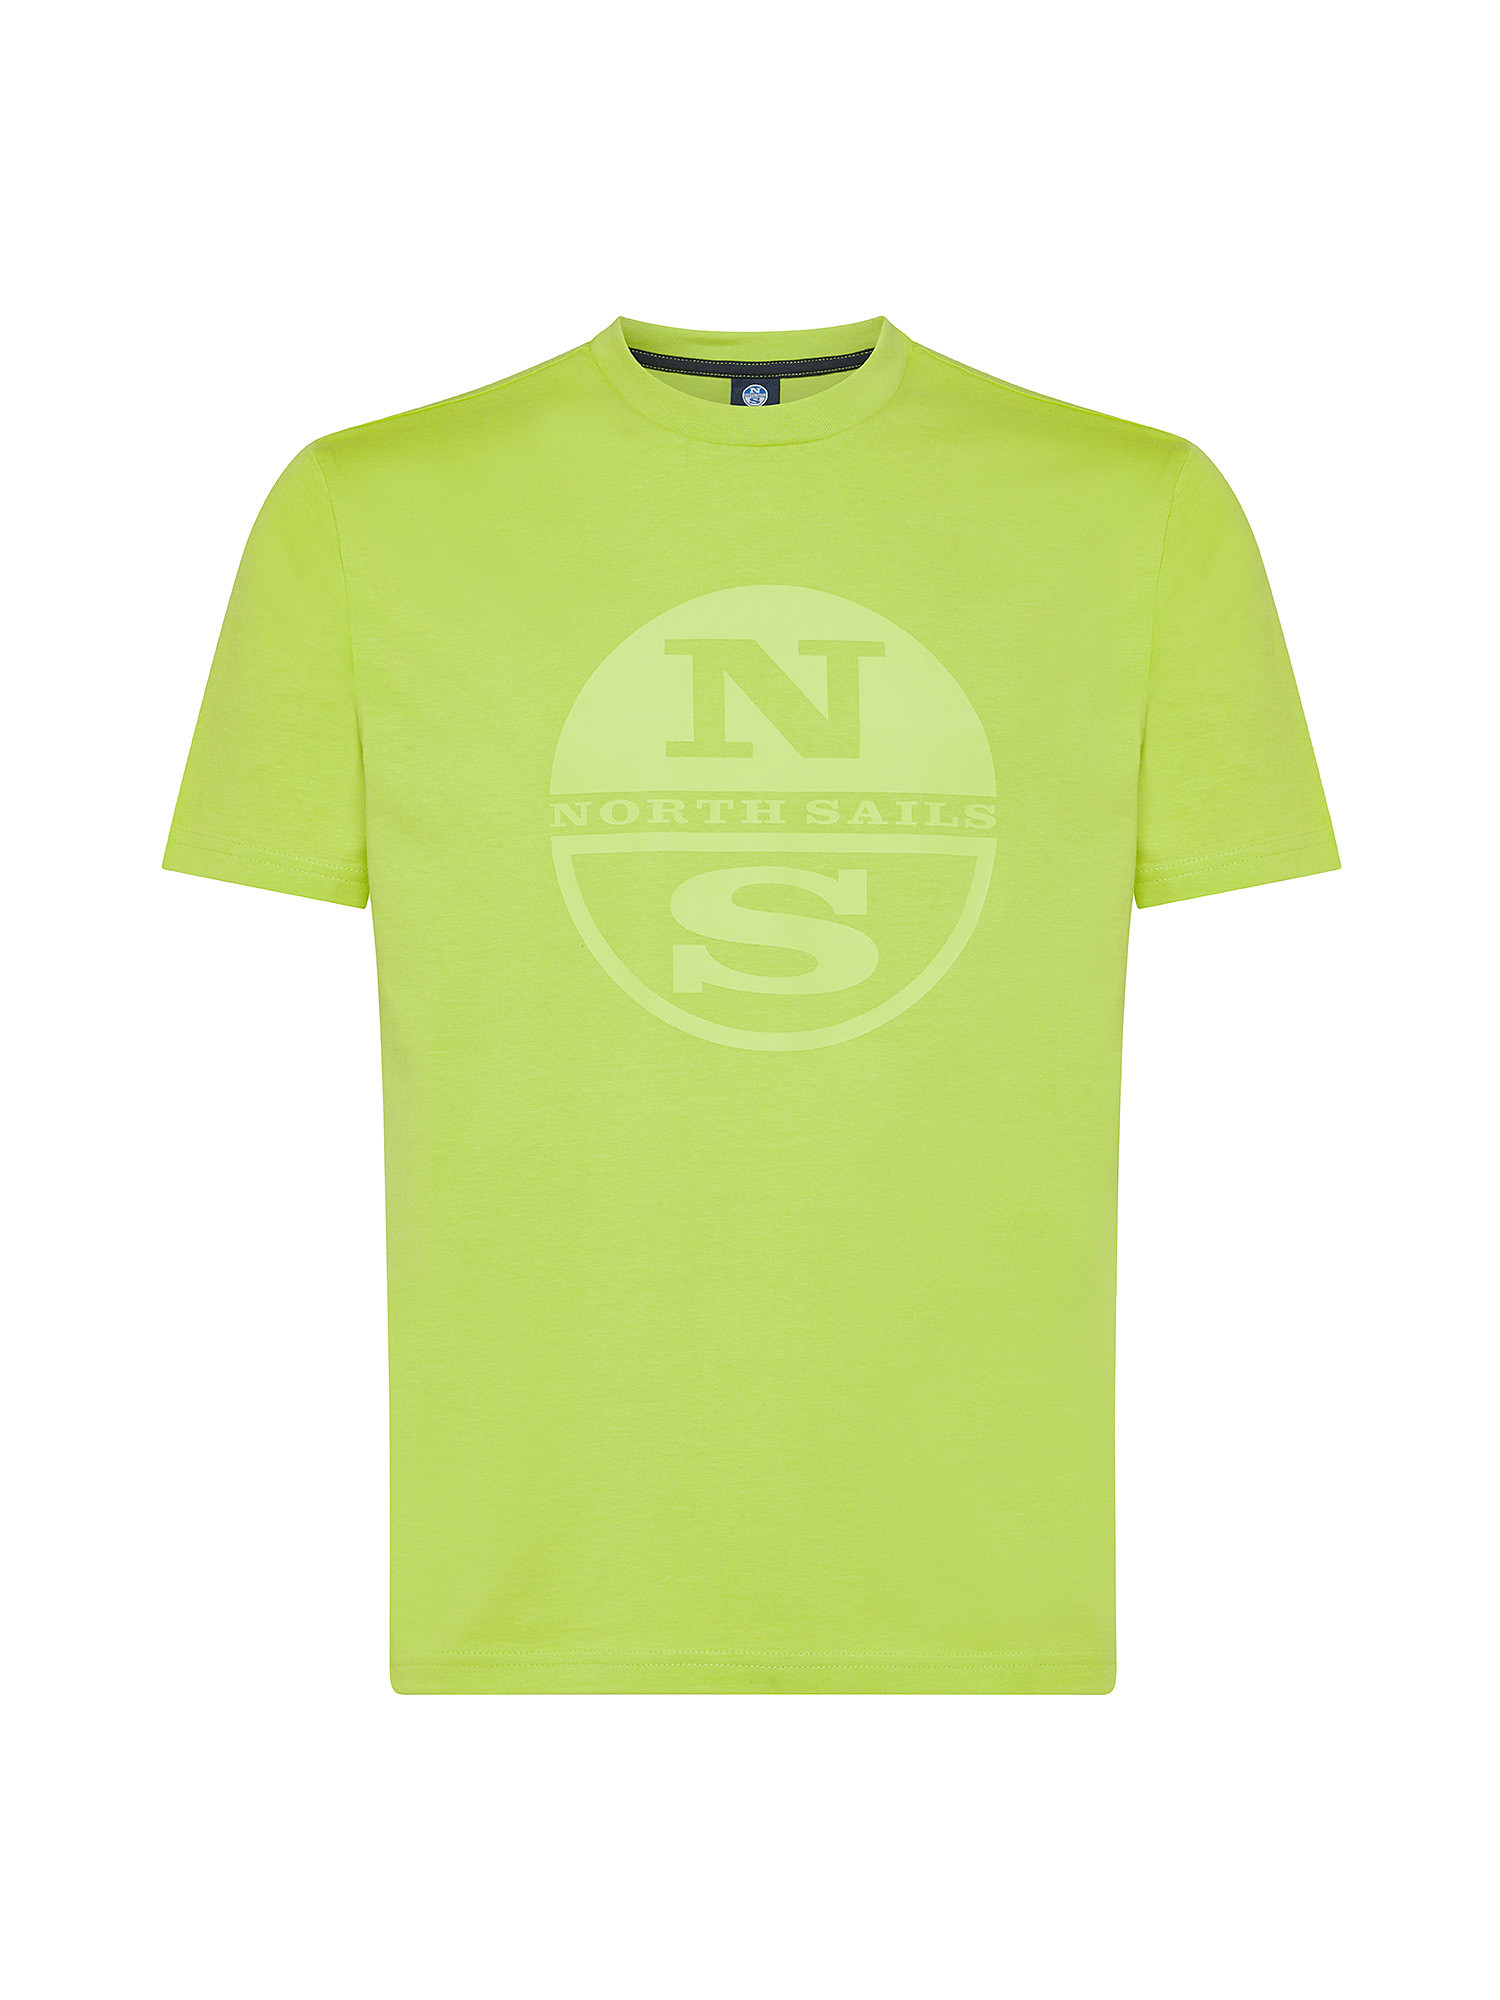 North sails - Organic cotton jersey T-shirt with printed maxi logo, Light Green, large image number 0